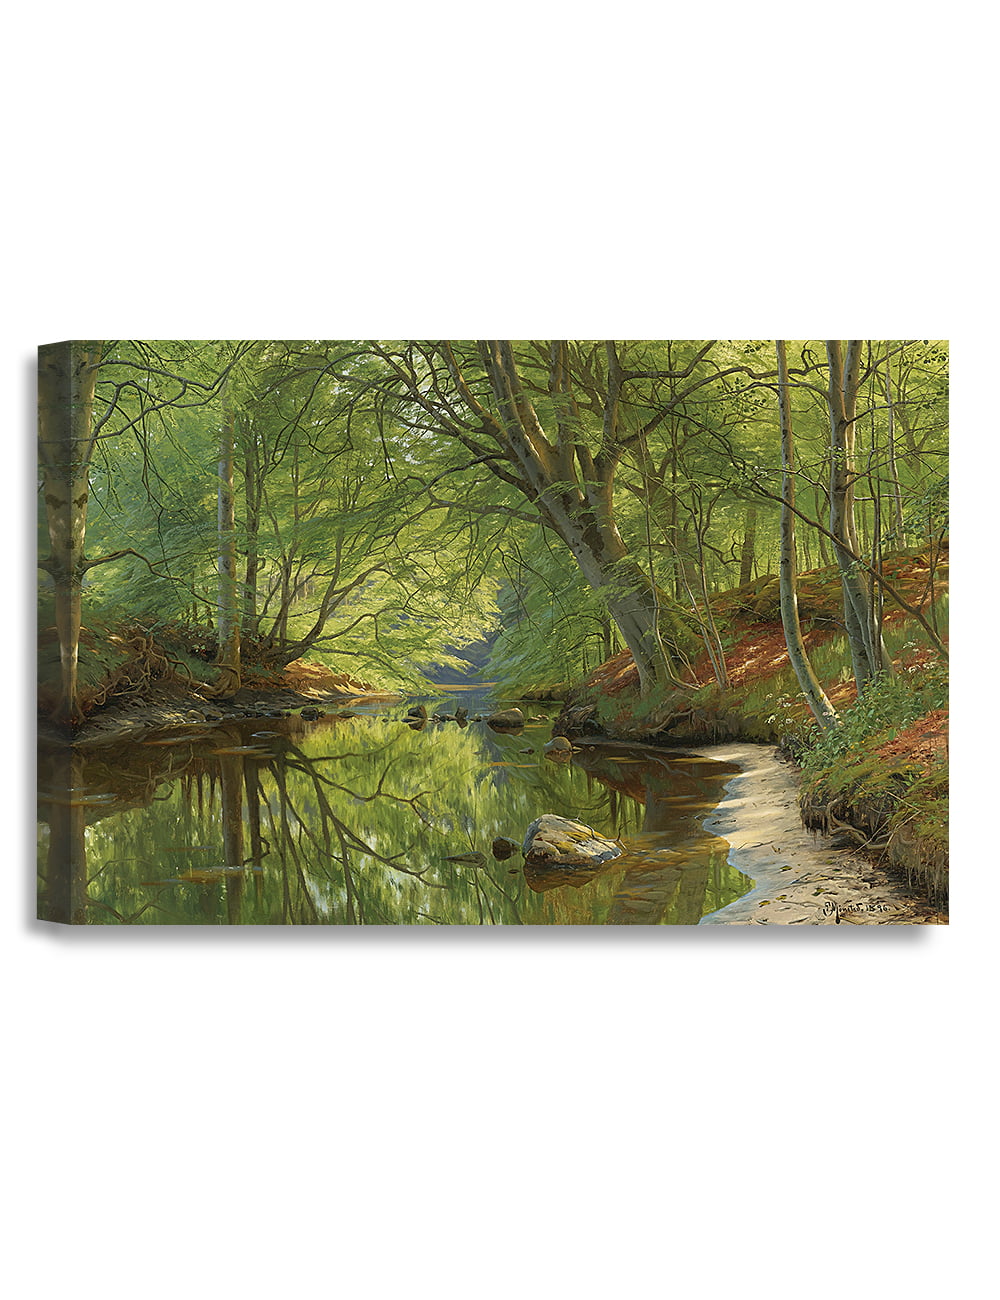 DECORARTS Forest Stream, Peder Mork Monsted Classic Art Reproductions.  Giclee Canvas Prints Wall Art for Home Decor 18x12